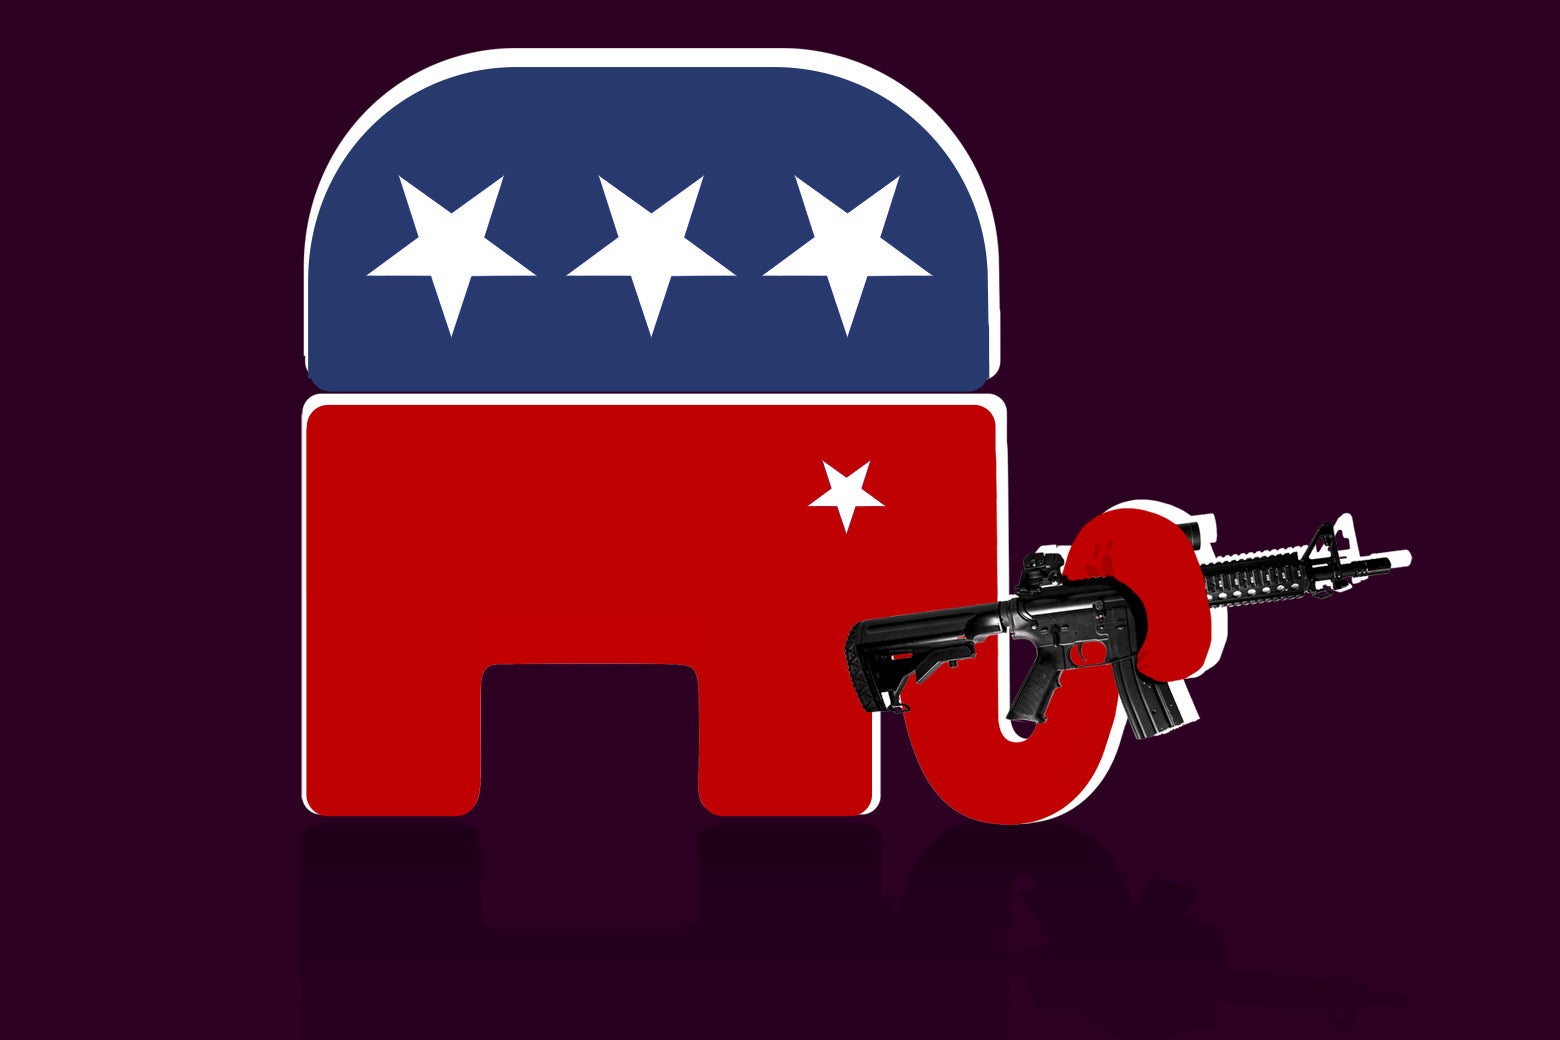 The GOP elephant holds a gun in its trunk.